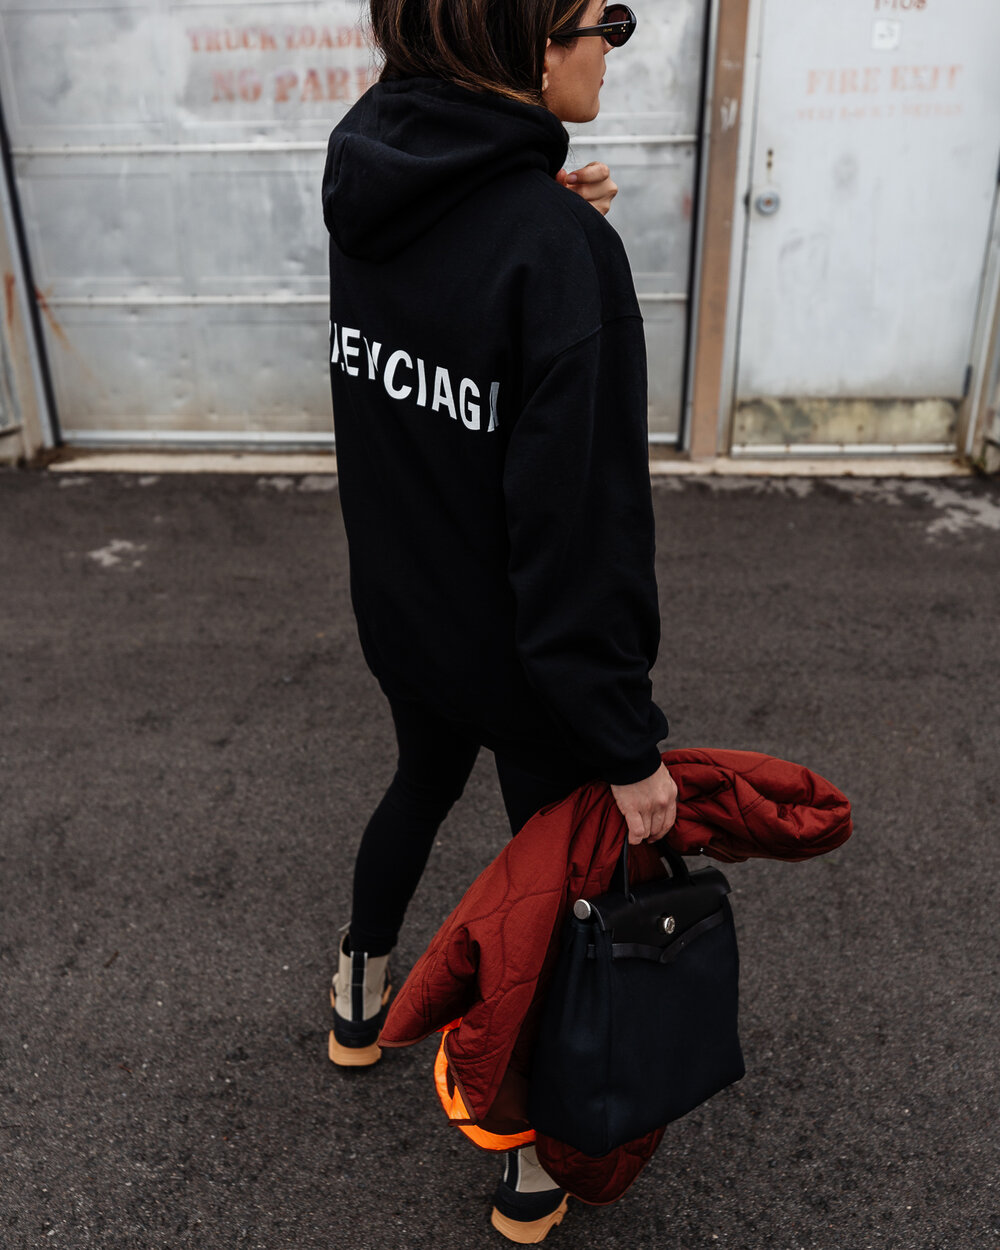 The Frankie Shop quilted Jacket Dupe, Balenciaga back logo hoodie, leggings streetstyle, hermes herbag PM, sorel brex boots, woahstyle.com by nathalie martin_4944.jpg